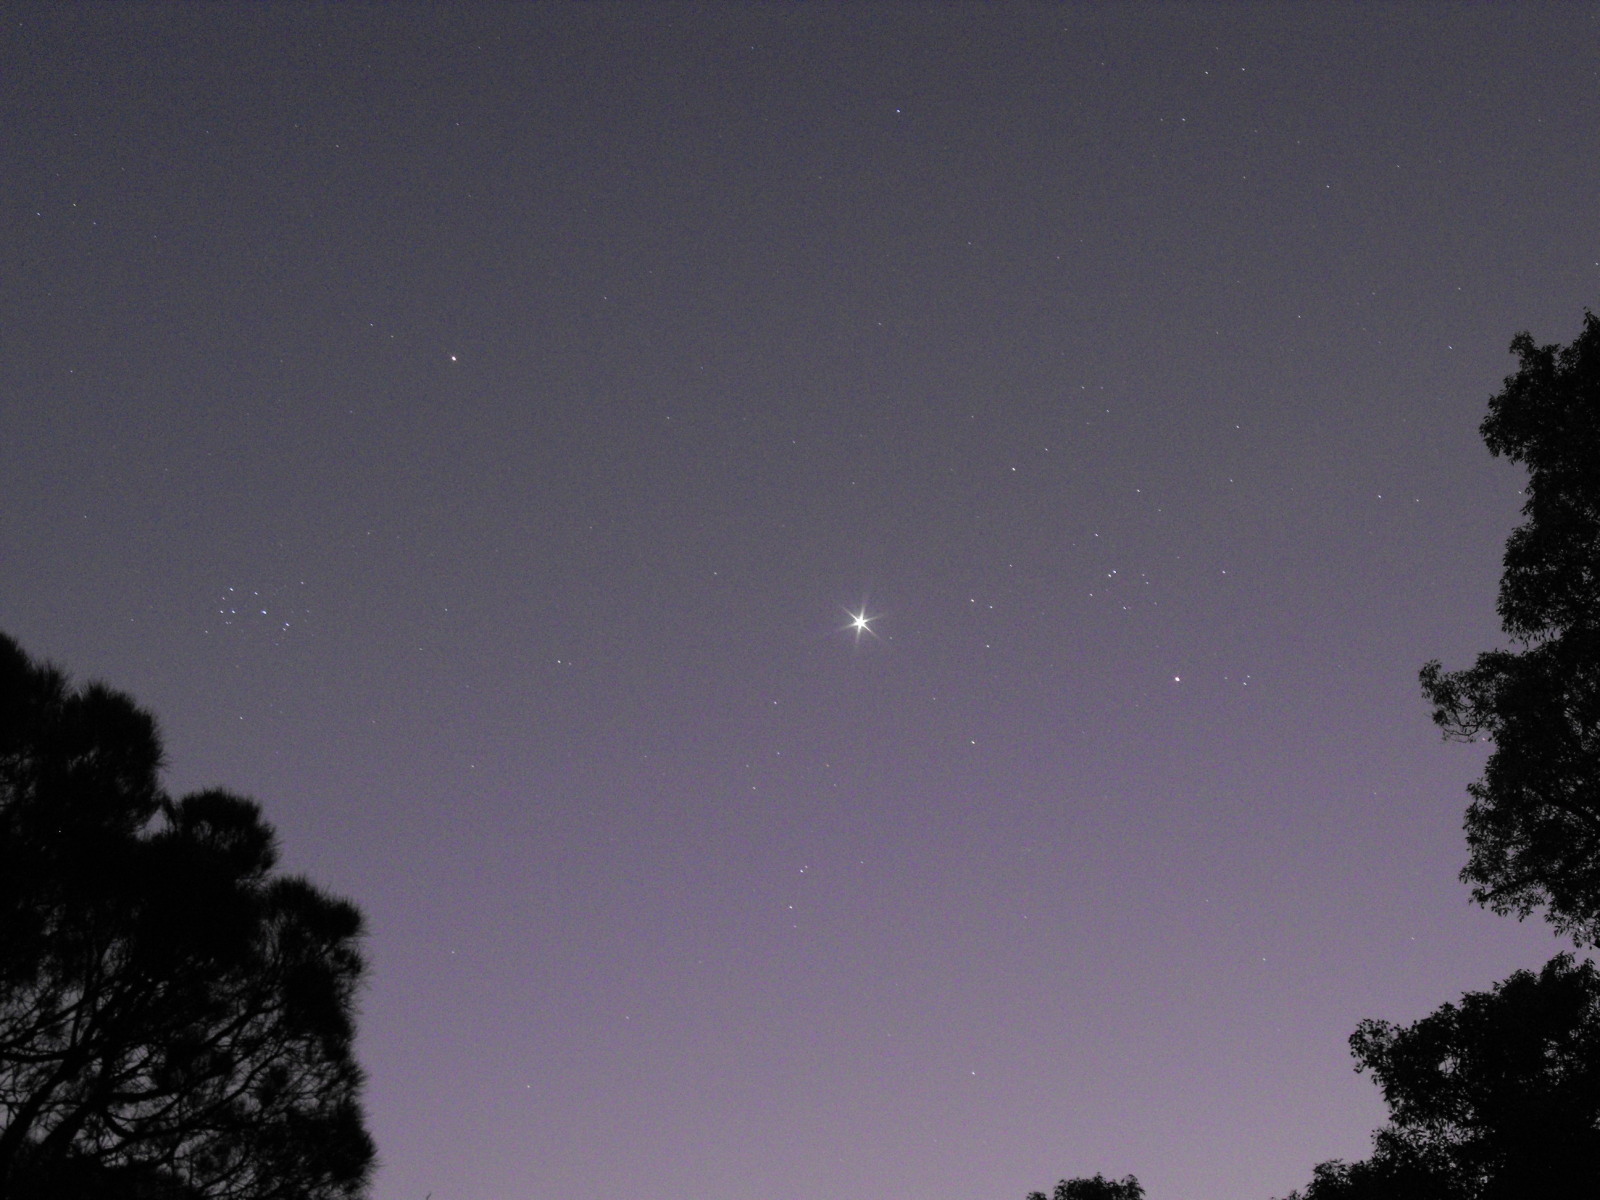 Venus and Mars between the Pleiades and Hyades